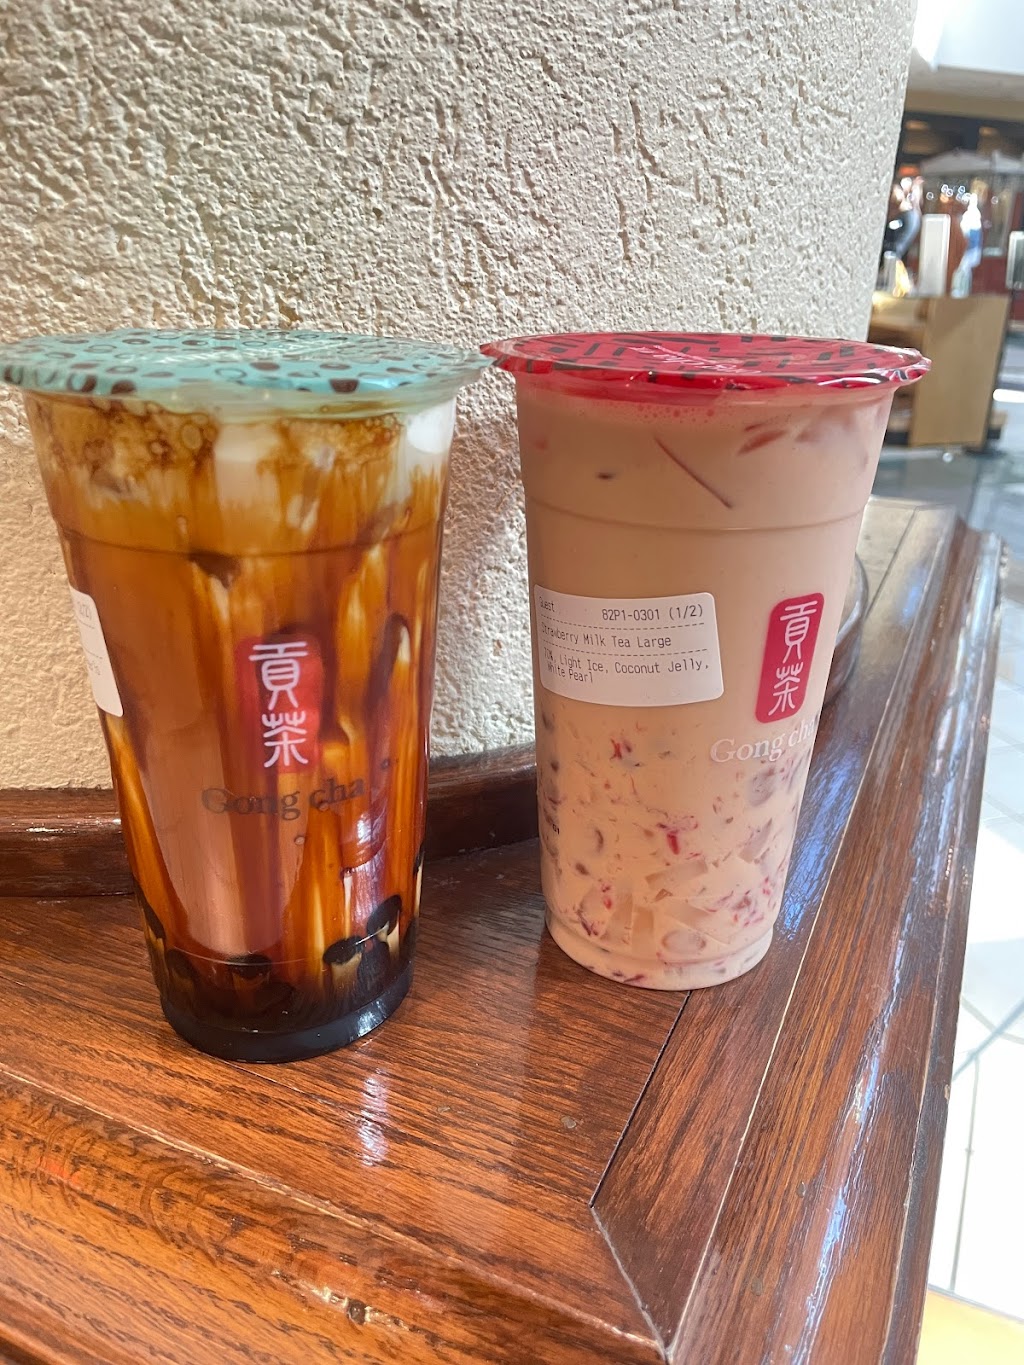 Gong cha | 2500 W Moreland Rd Ste 1020, Willow Grove, PA 19090 | Phone: (215) 830-8888